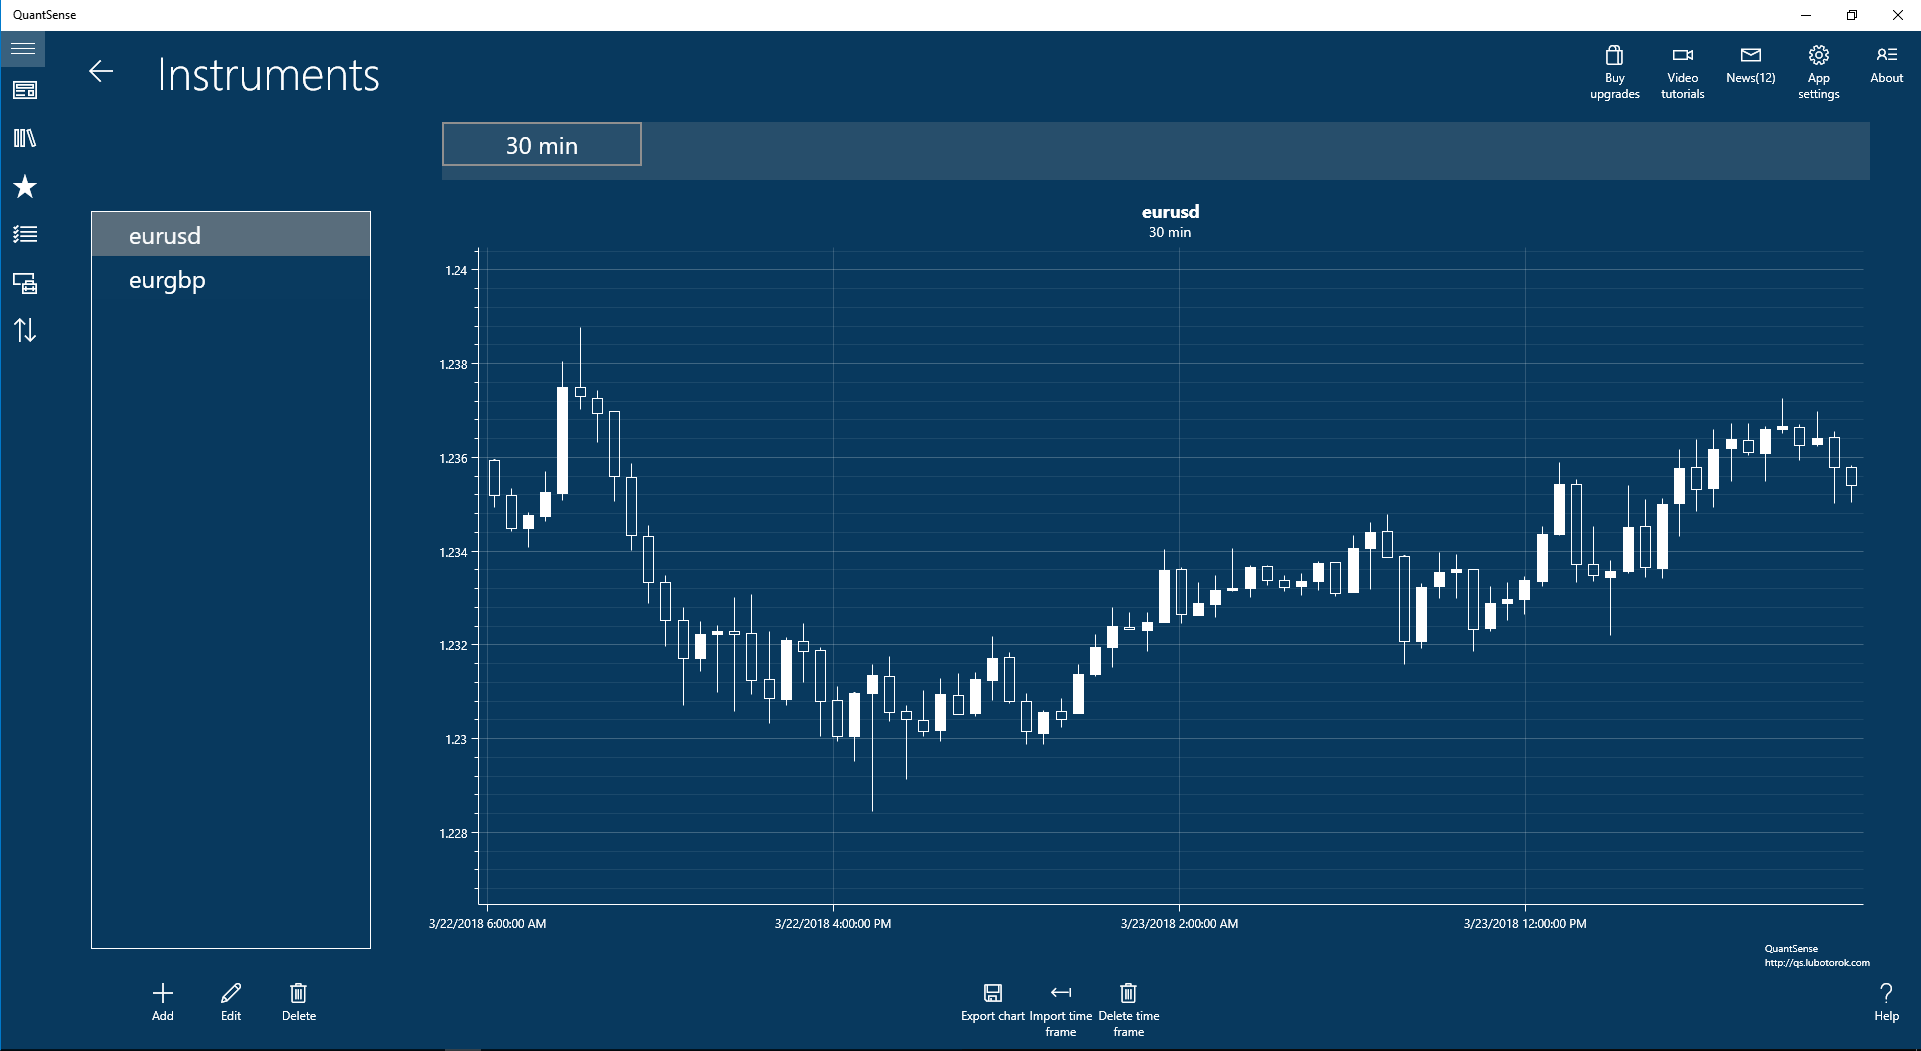 The candlestick chart showing the market for selected instrument and selected time frame.